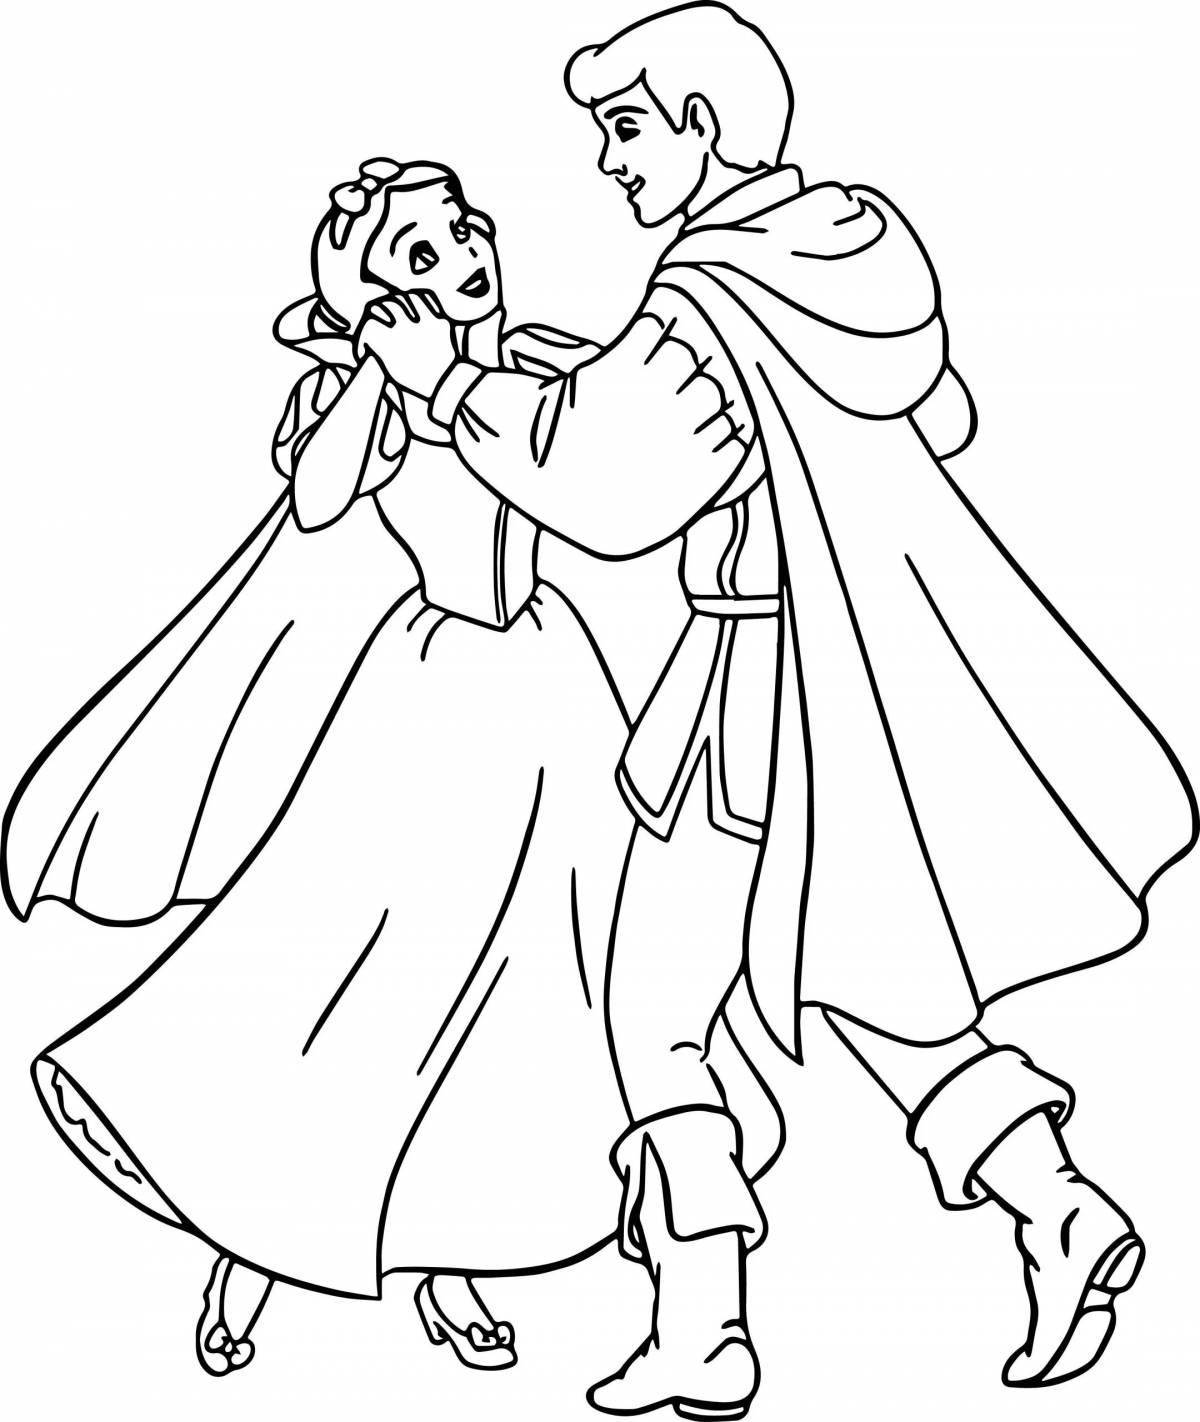 Violent coloring princess and prince for kids